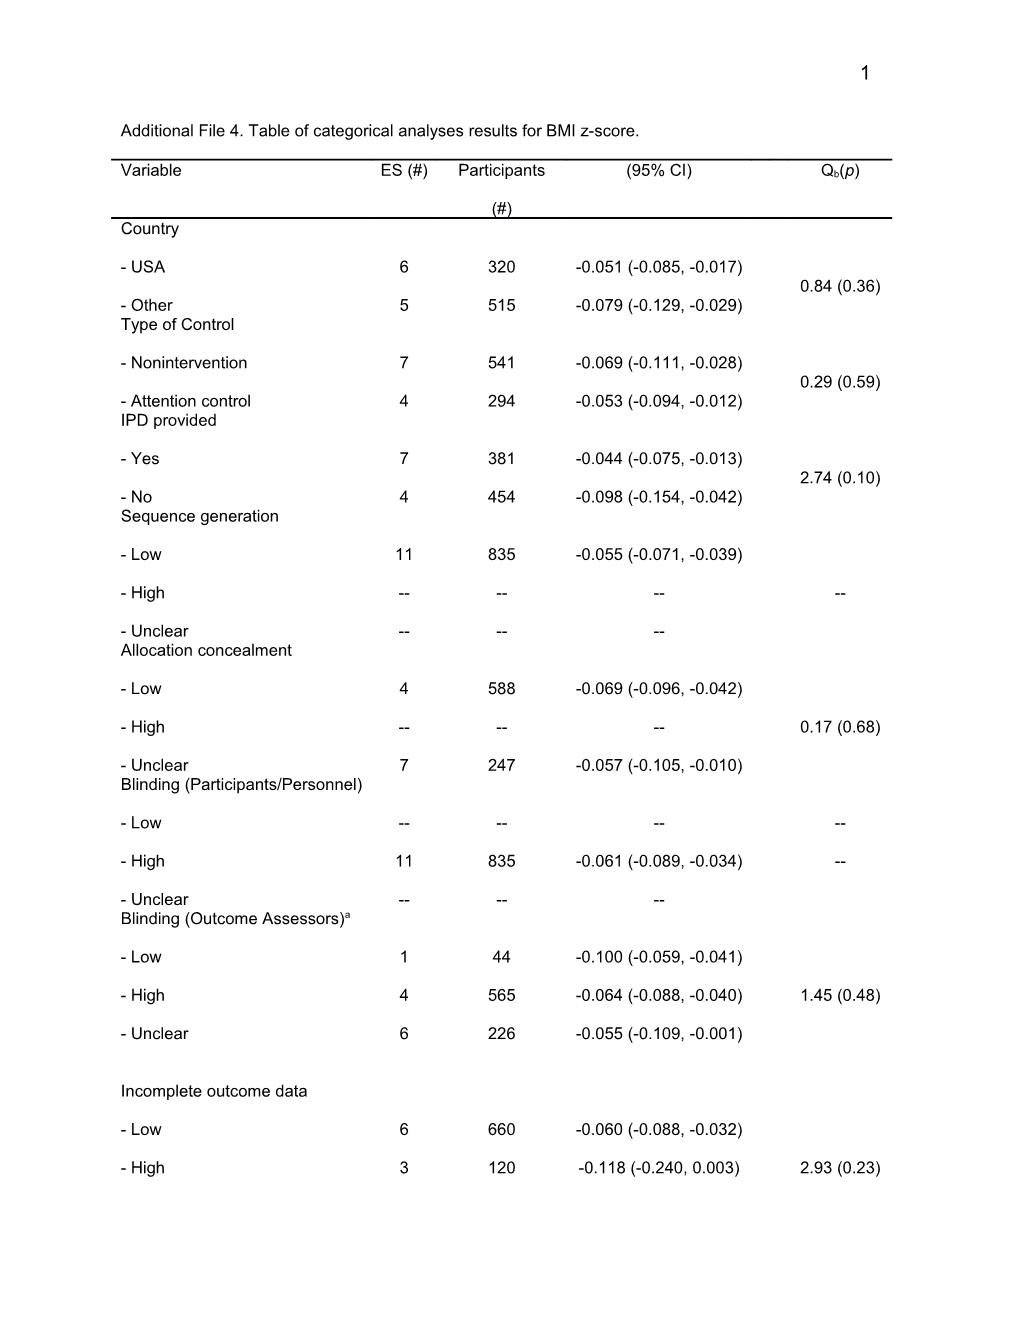 Additional File 4.Table of Categoricalanalyses Results for BMI Z-Score